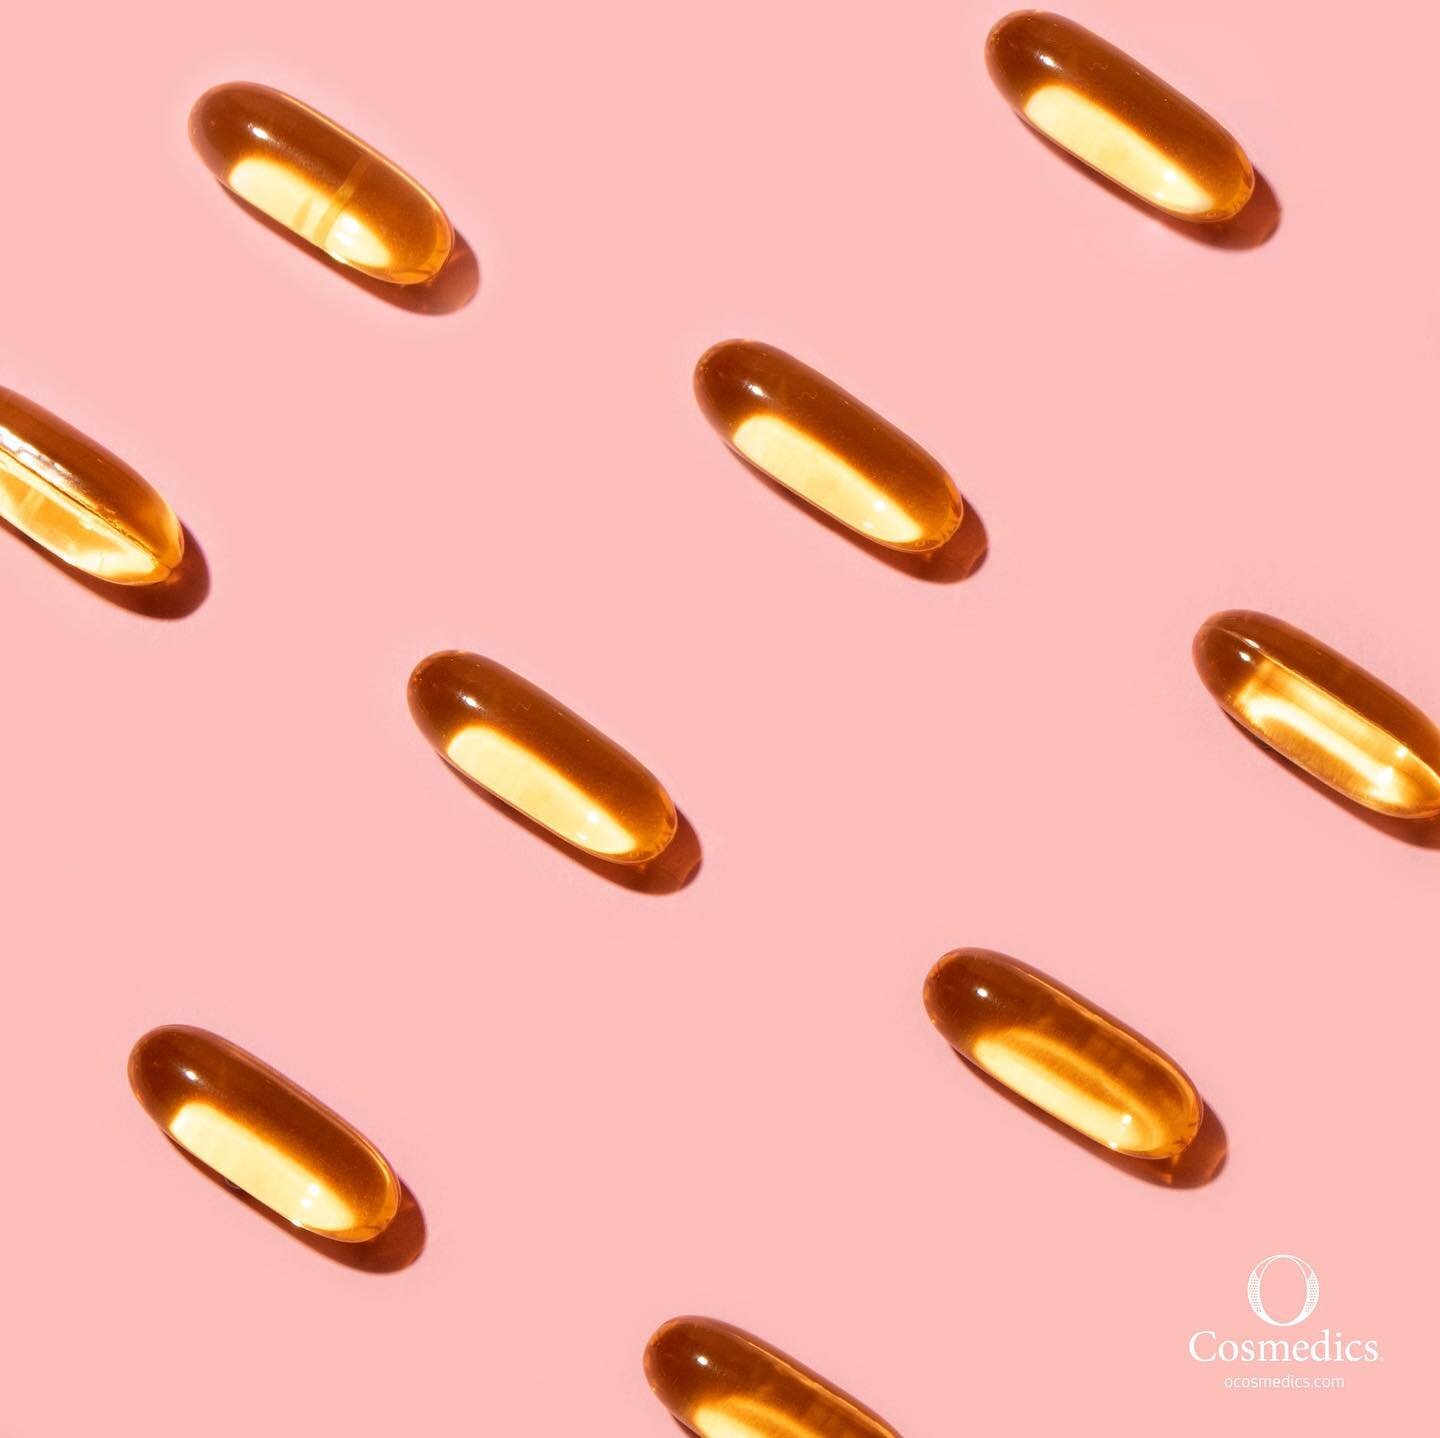 They&rsquo;re not called Essential for nothing! O EFA&rsquo;s Max Complex Supplements contain natural Essential Fatty Acids, Omegas 3, 6 &amp; 9 and Gamma Linolenic Acid (GLA) to support healthy skin and hair. This powerful antioxidant improves gener